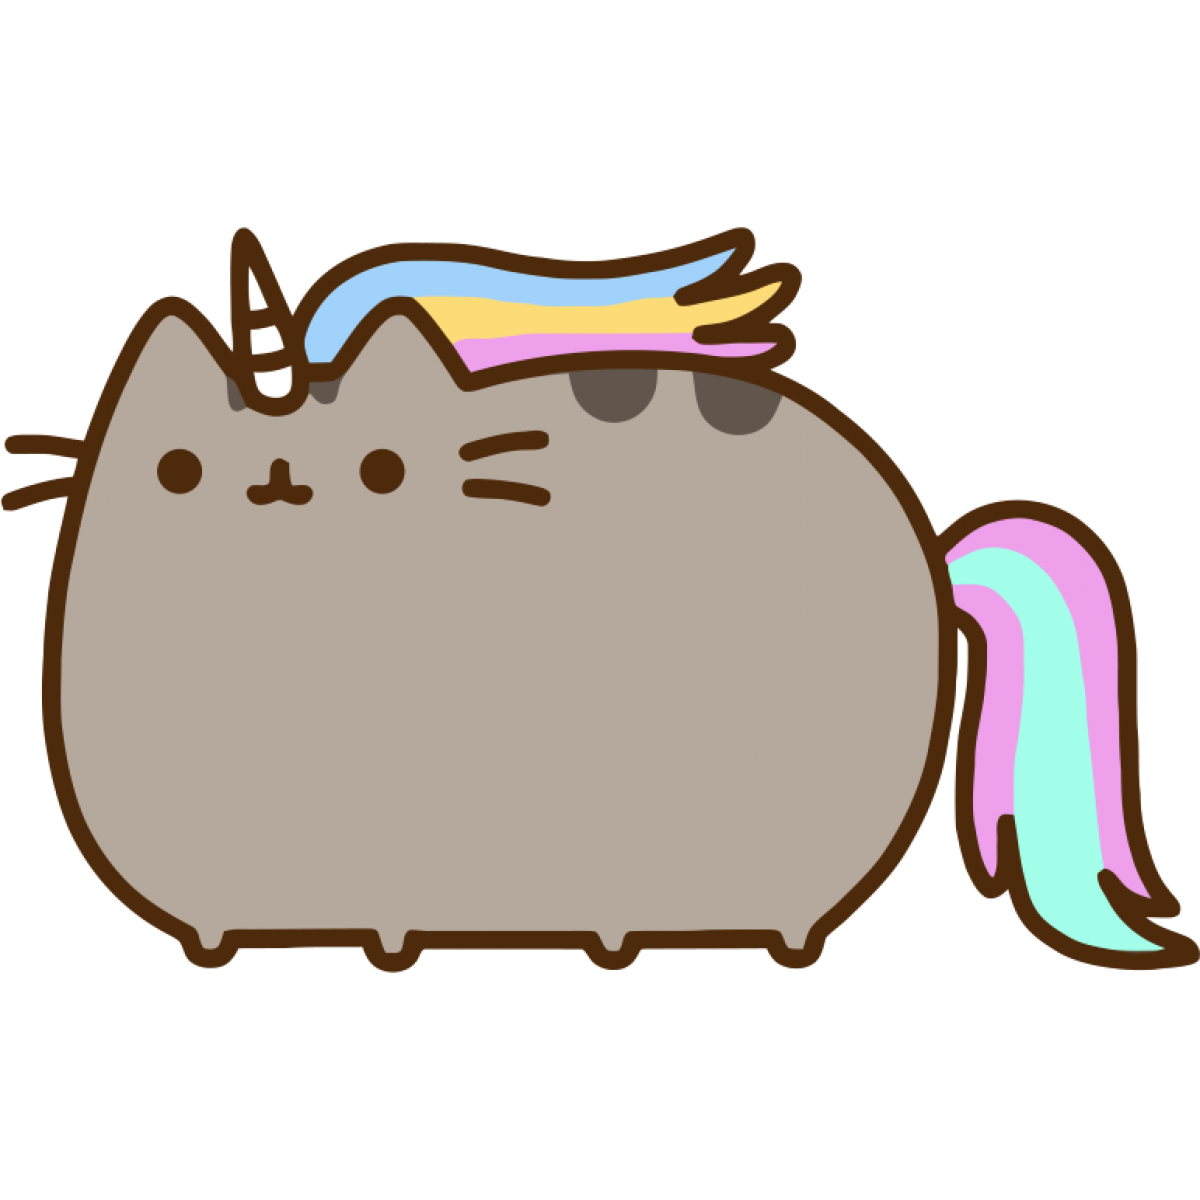 Food Snout Gund Pusheen Cat PNG Image High Quality PNG Image